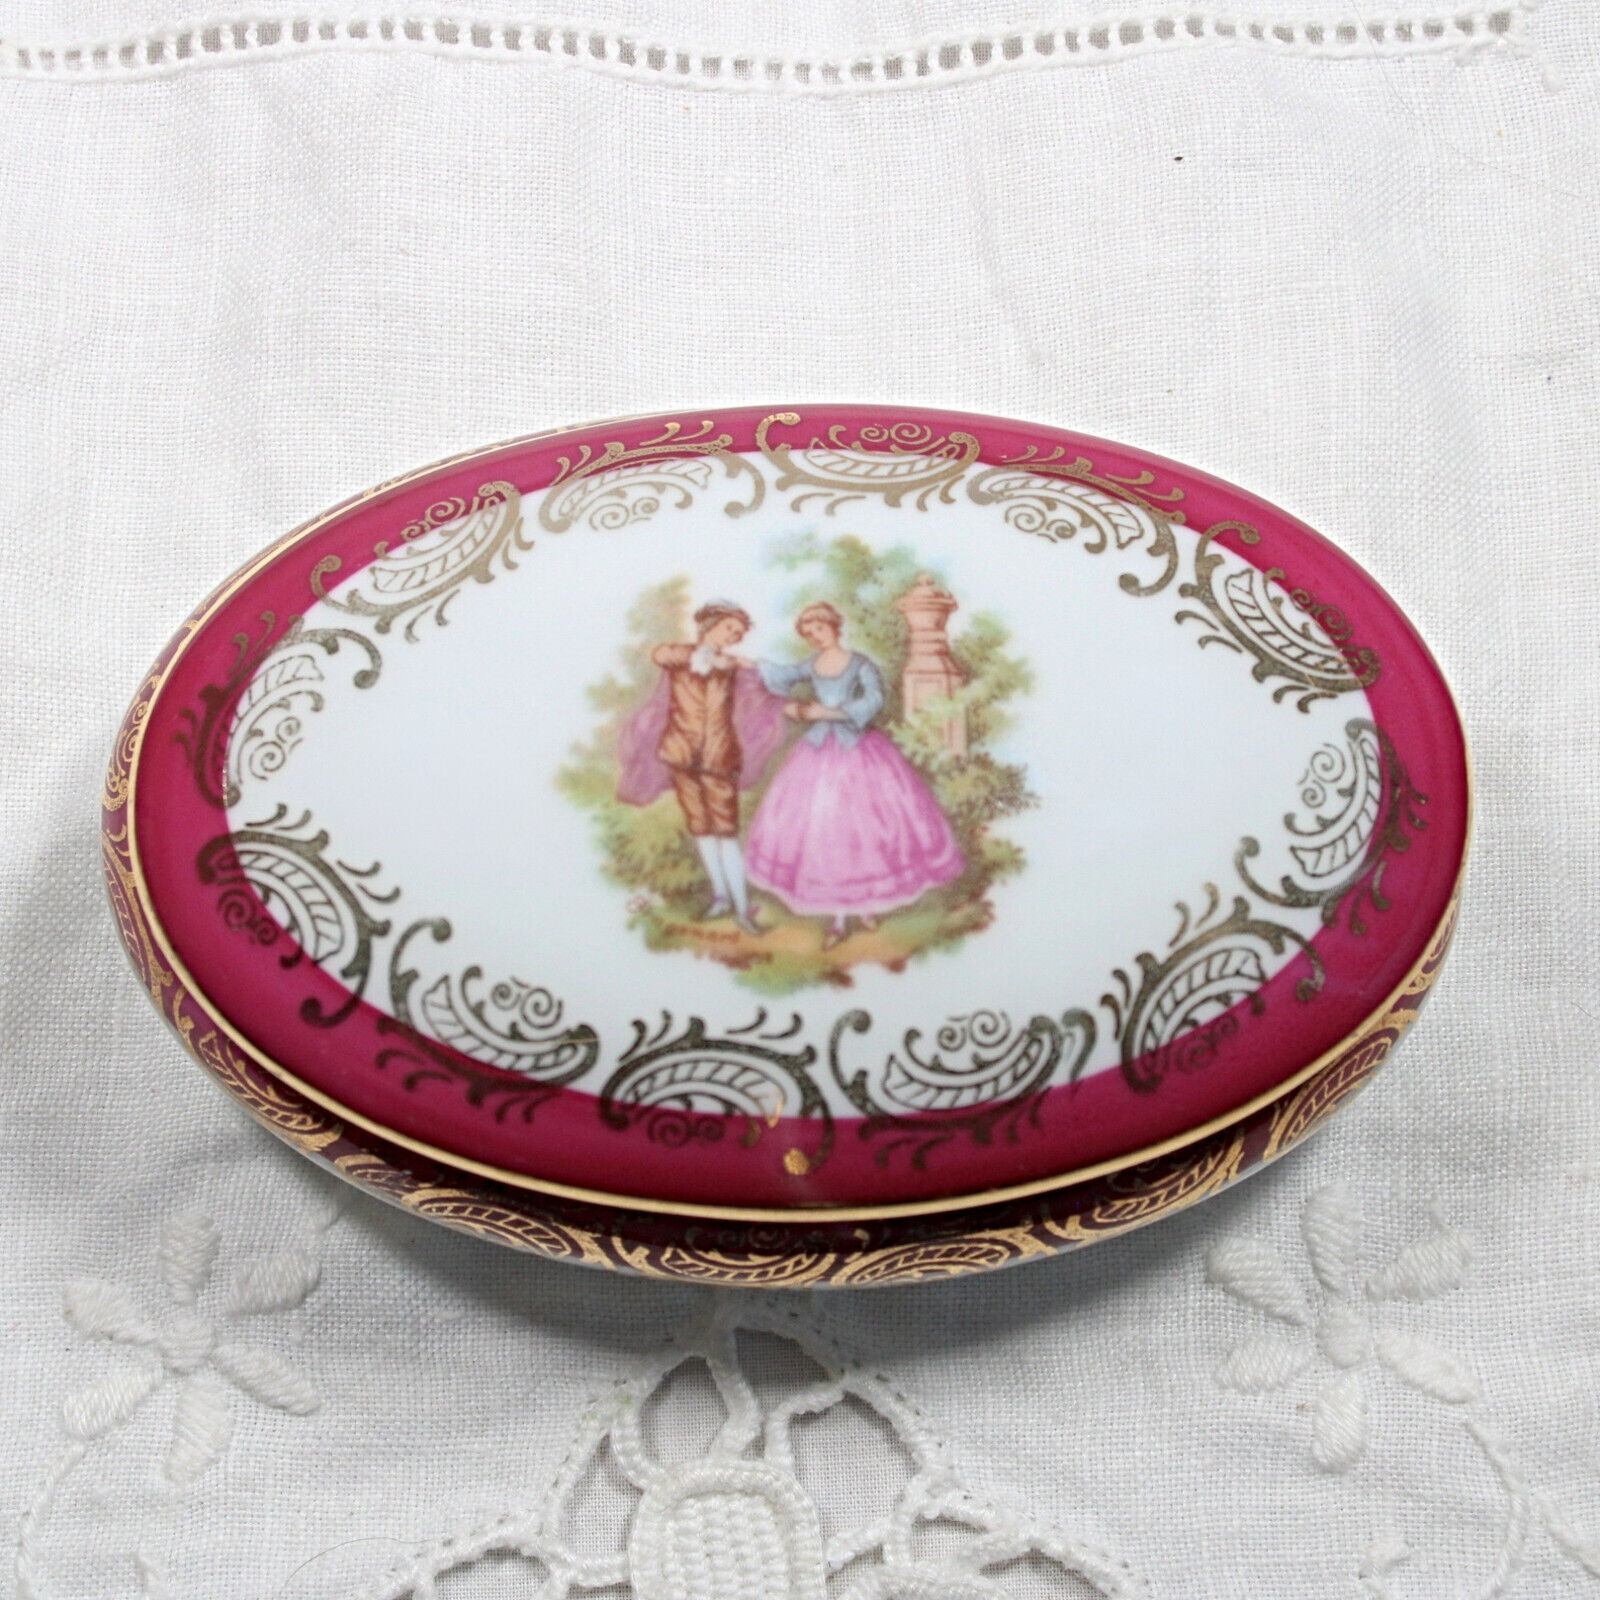 Vintage Feuillade Limoges Fragonard Courting Couple Jewelry Trinket Box Red Gold